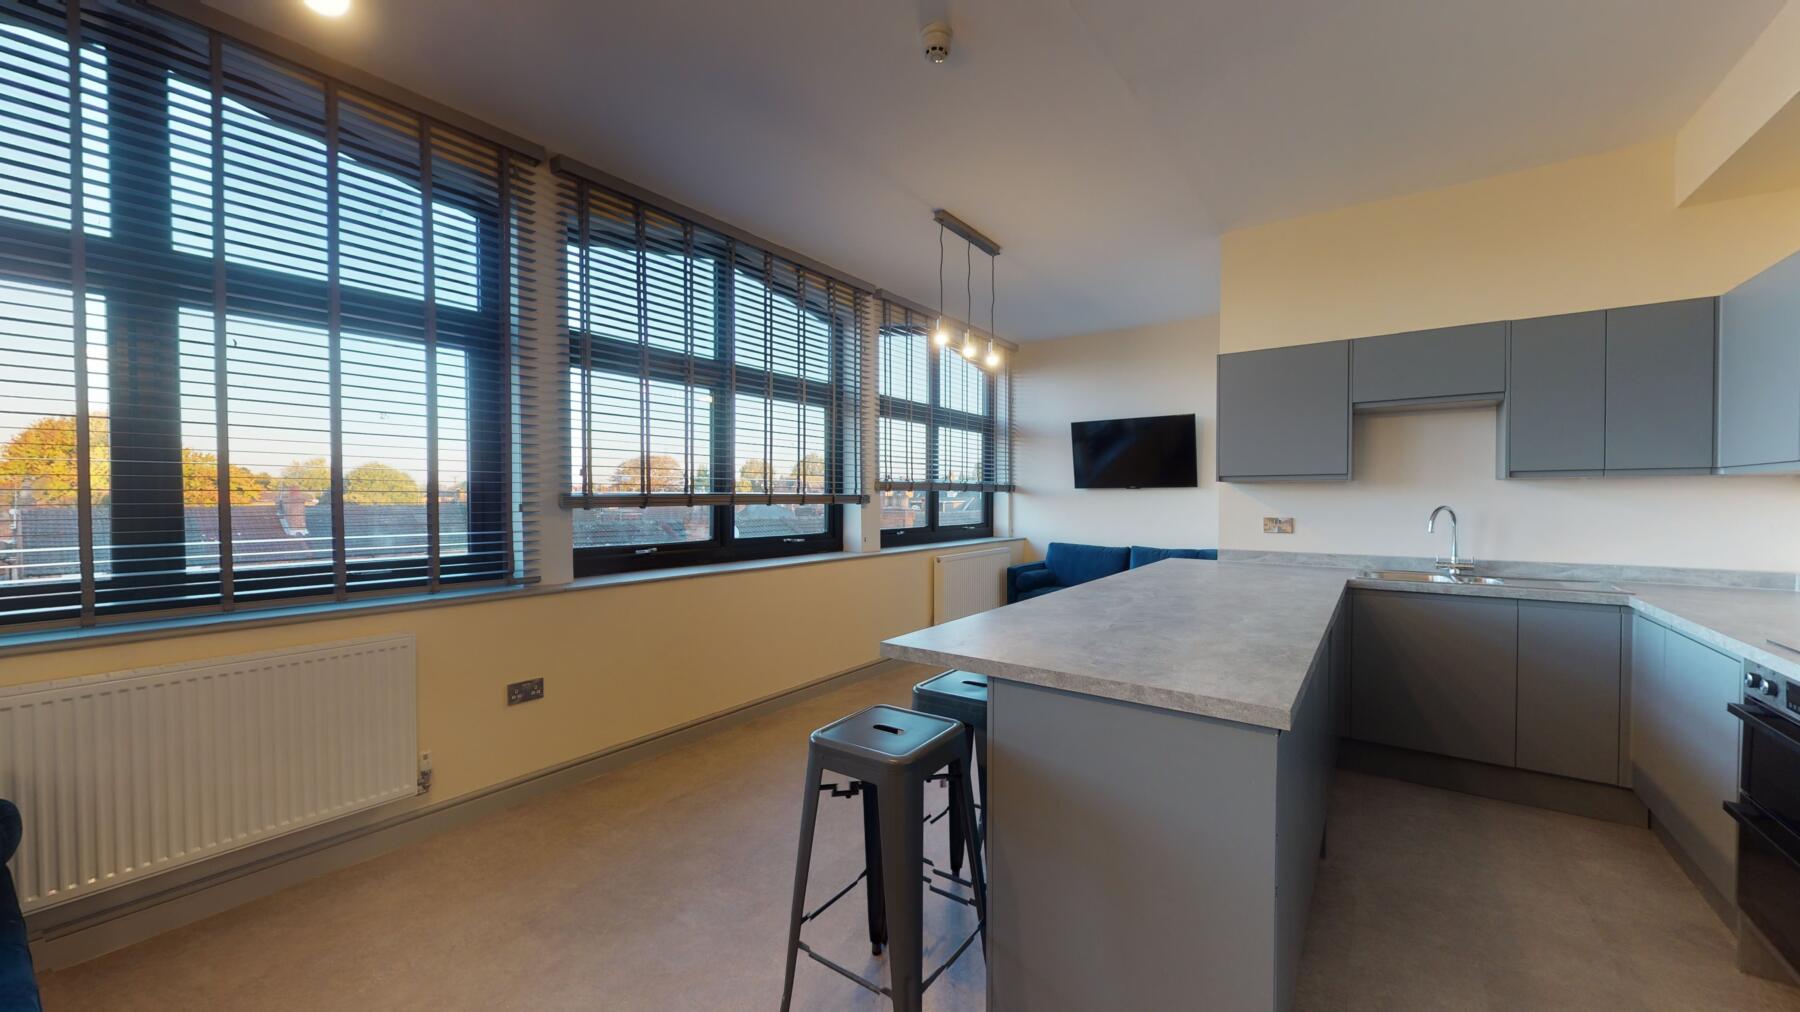 1 bed student accommodation in Lincoln · Available from 15th March 2023